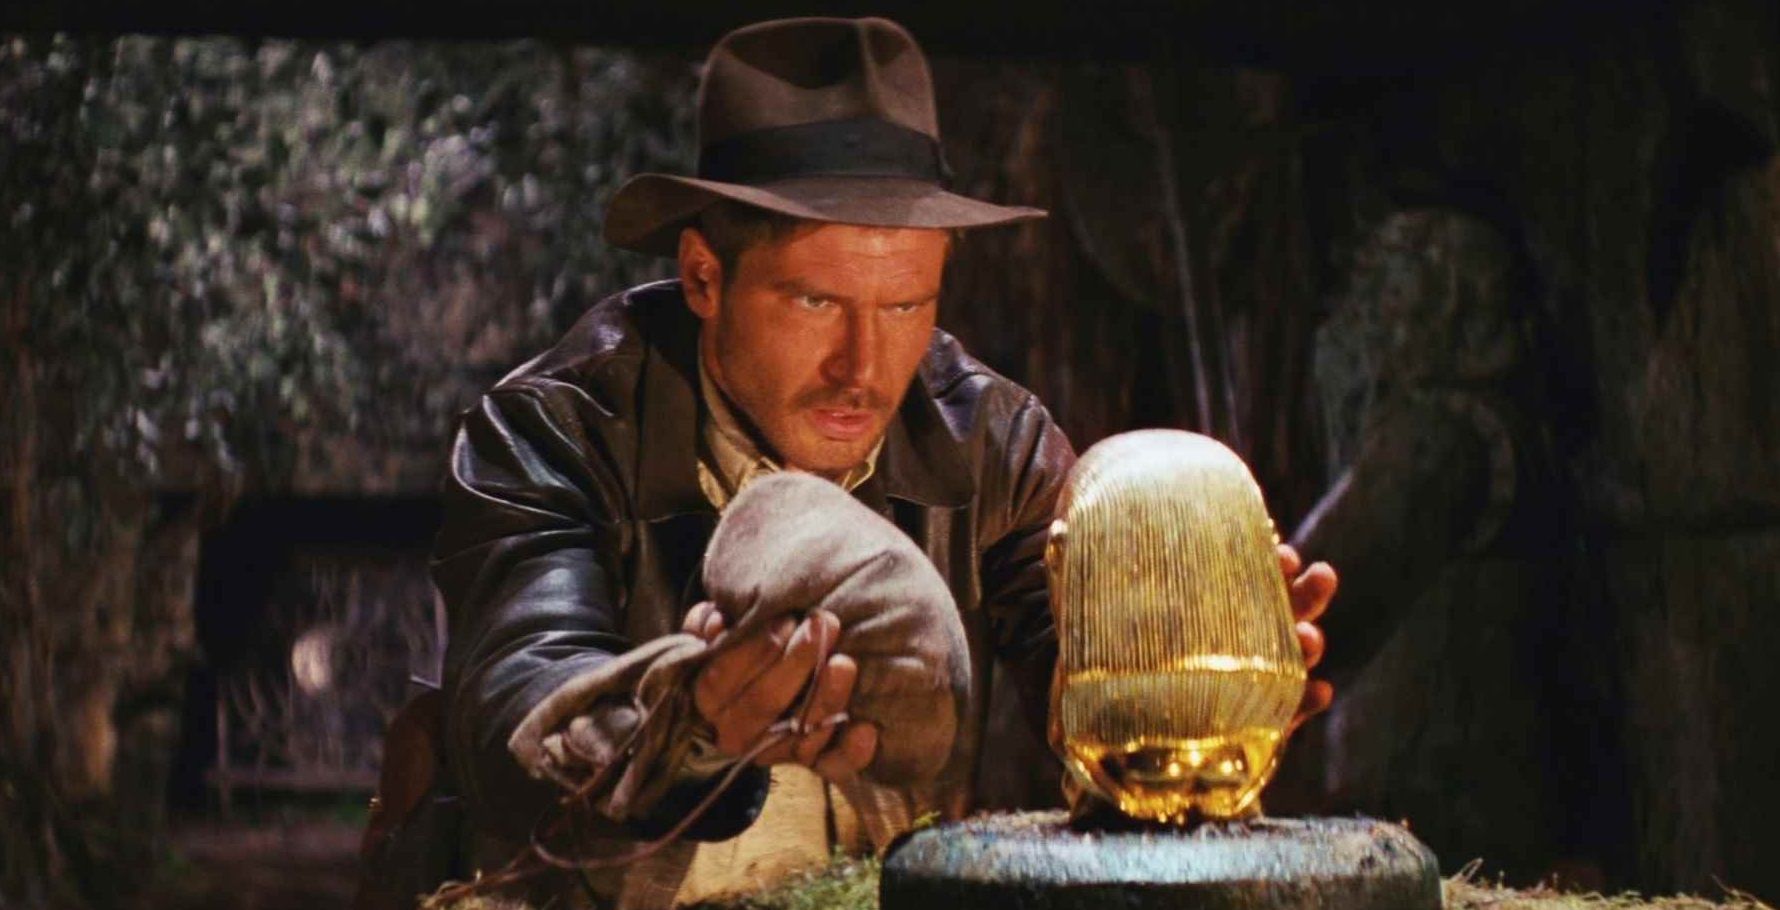 Indiana steals a golden idol in Indiana Jones in Raiders of the Lost Ark